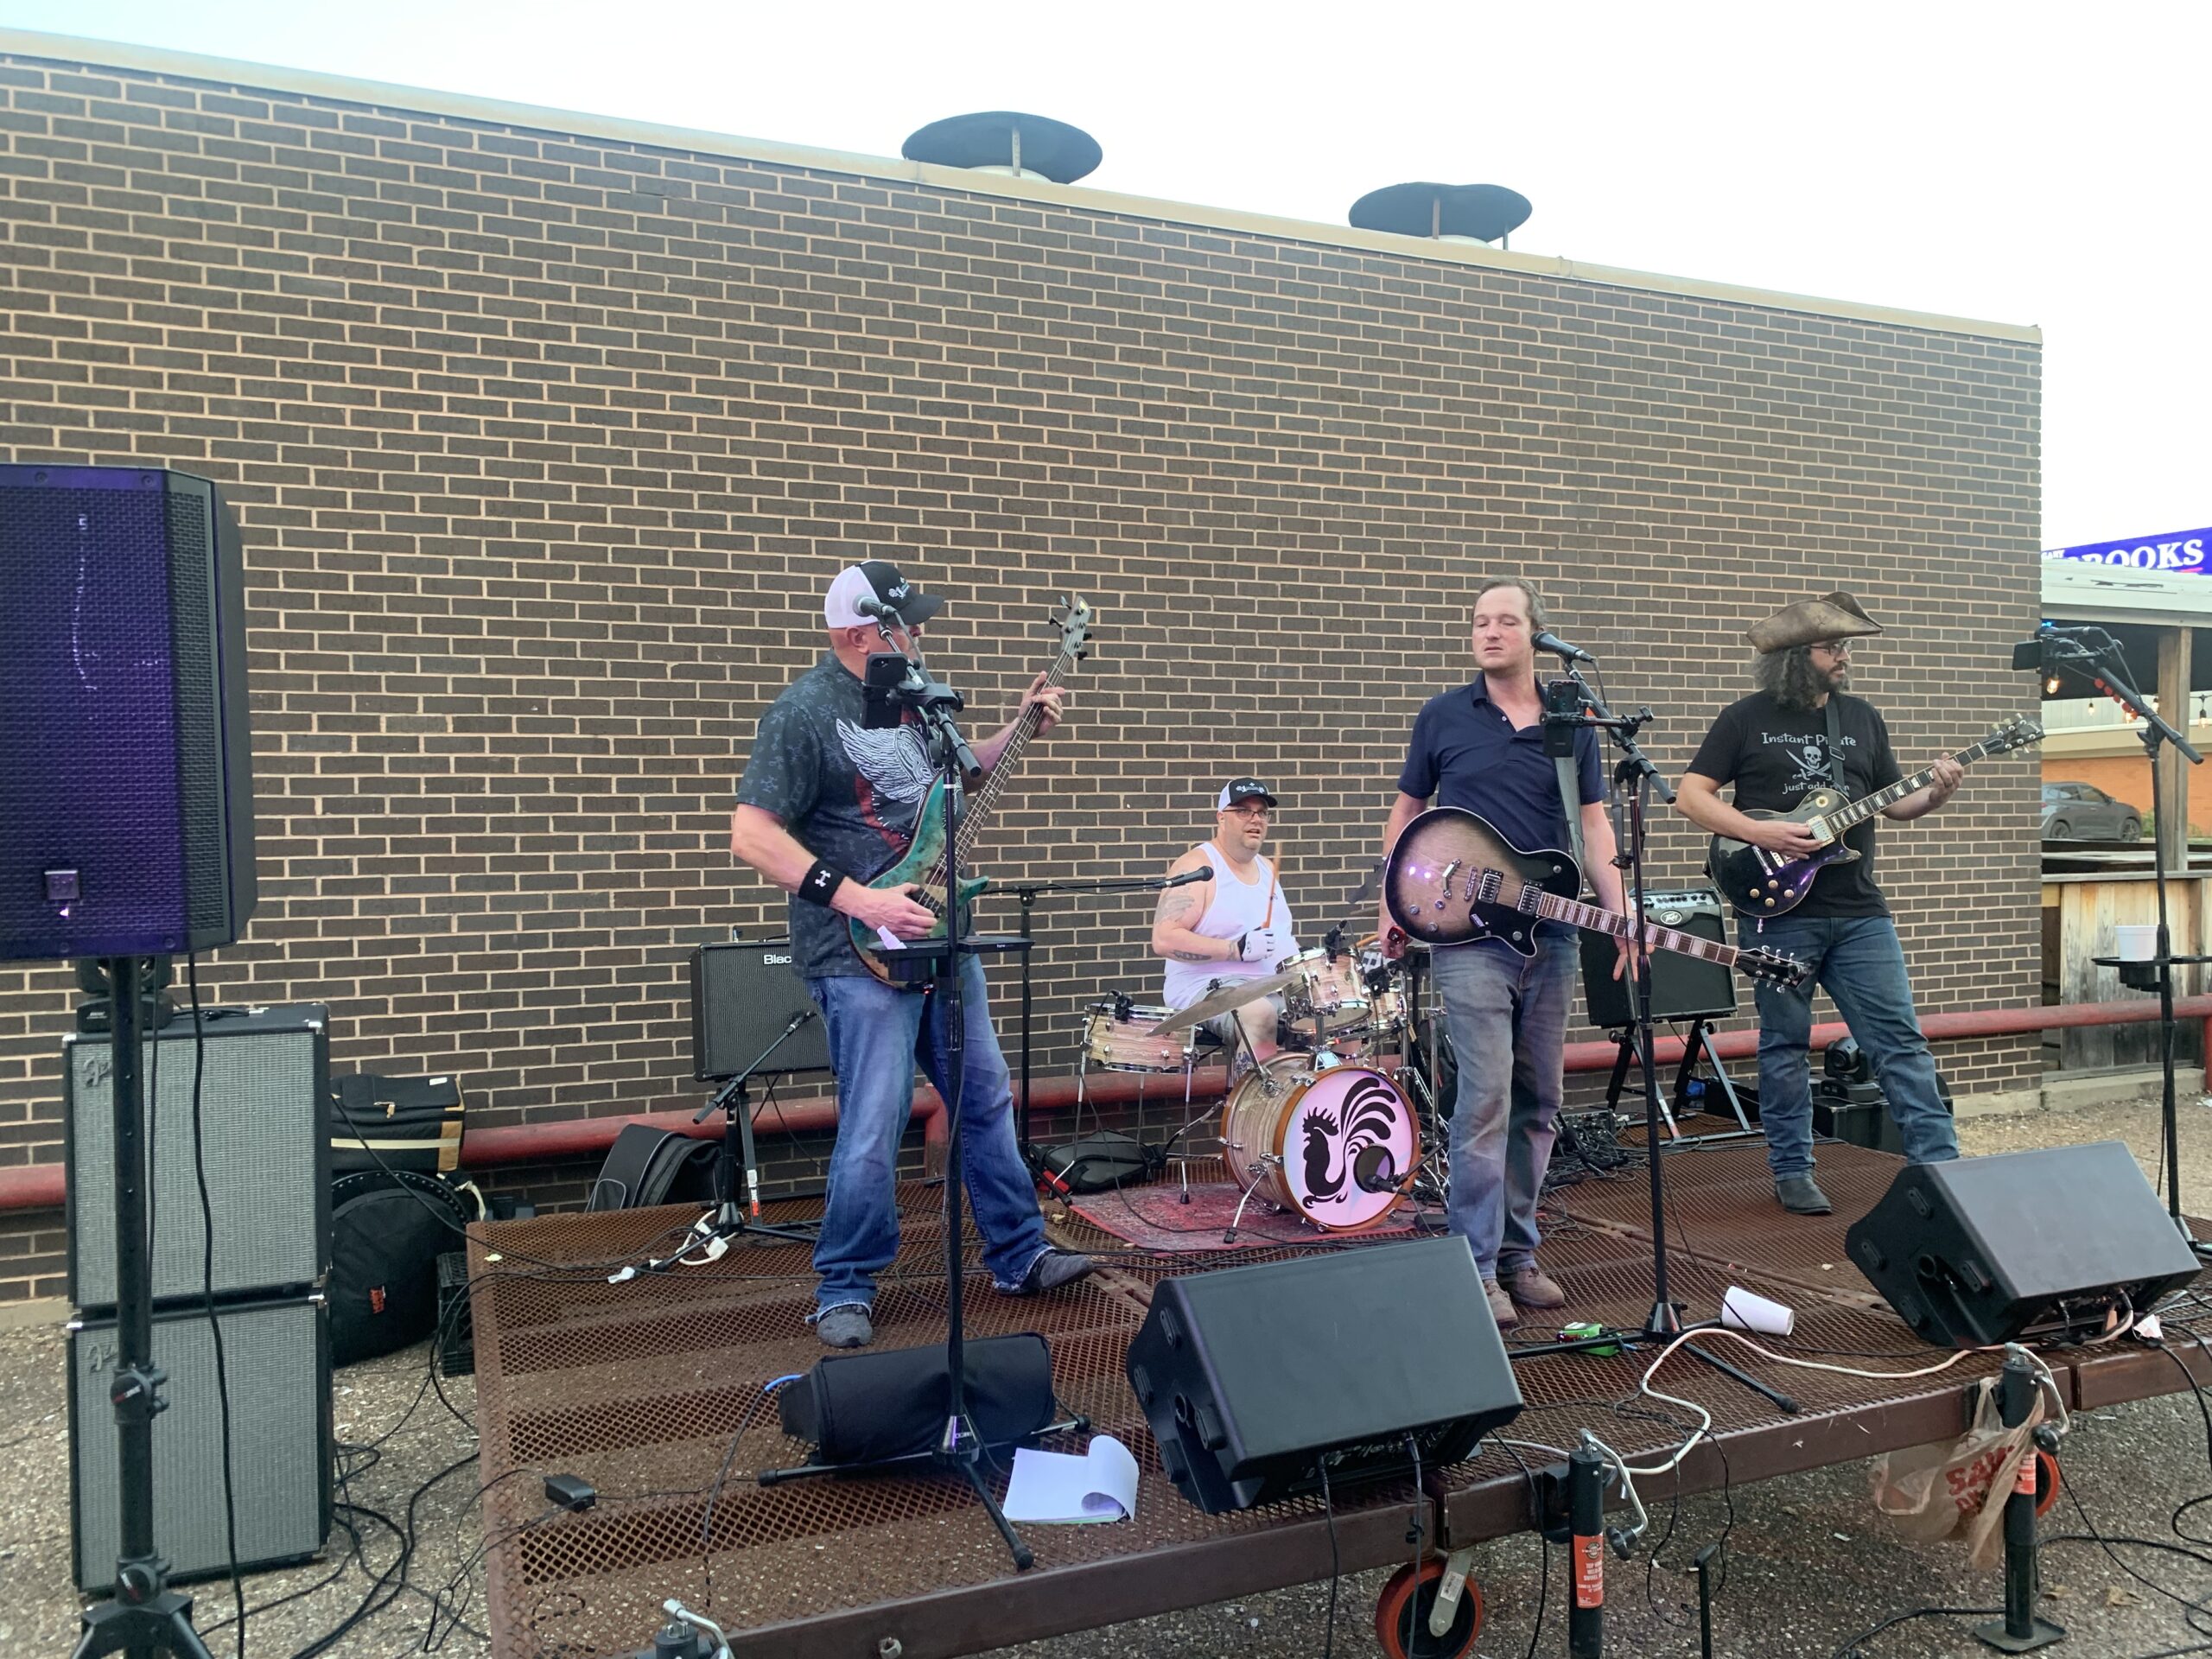 <h1 class="tribe-events-single-event-title">The Chicken Brothers @ Coyotes Bar & Grill (Shreveport, La)</h1>